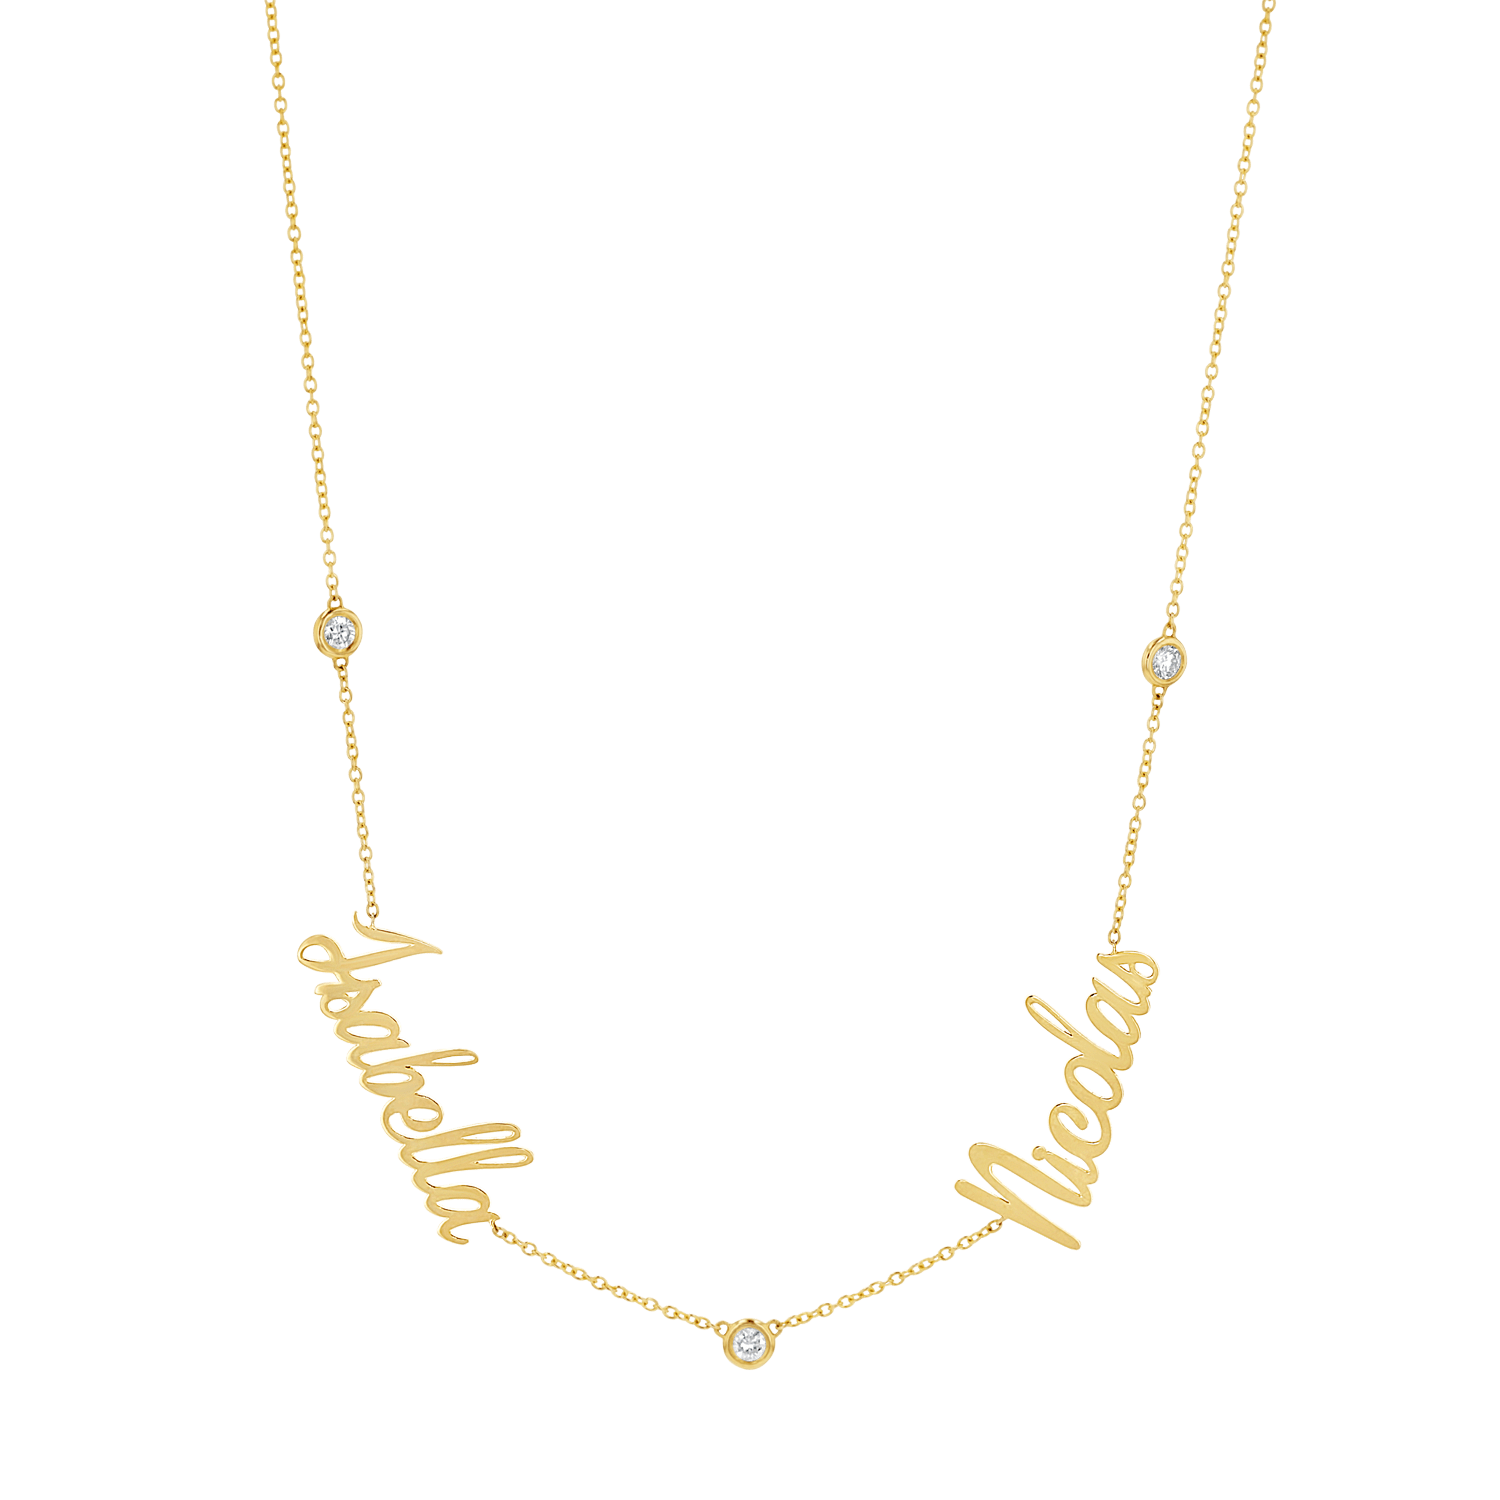 14K Gold Cable Chain Necklace 14K White Gold / 16 - 18 Adjustable by Baby Gold - Shop Custom Gold Jewelry